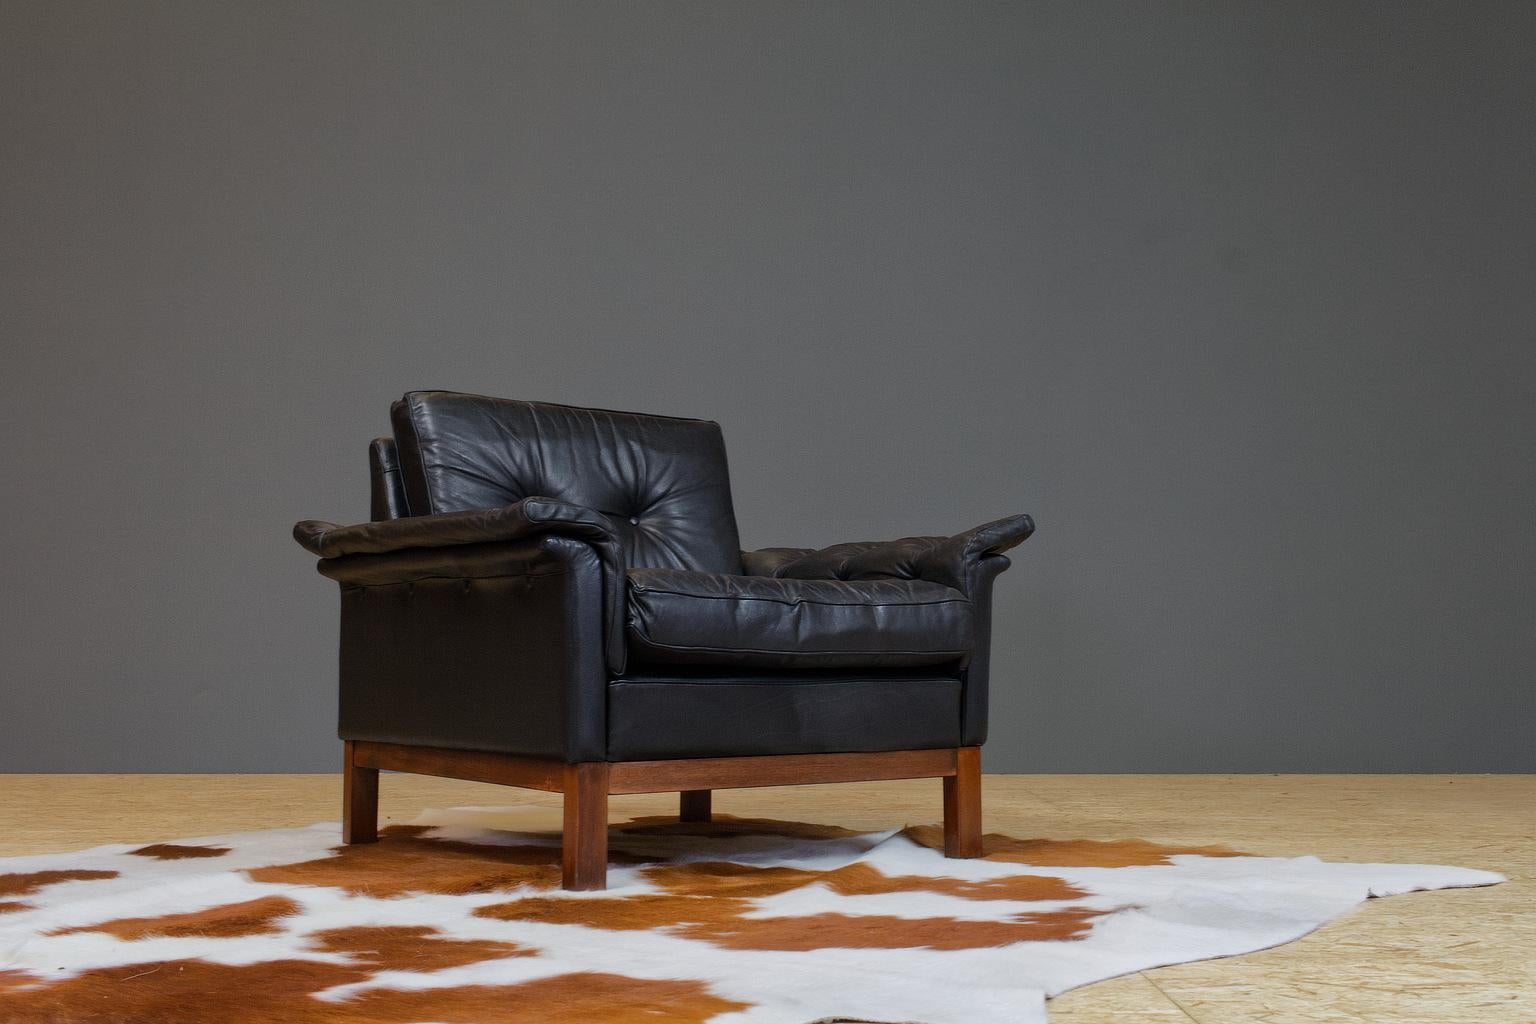 Scandinavian Modern comfortable and luxurious lounge chair in original, yet well preserved black leather. Originated from Denmark 1960s. Designer unknown, yet the pieces feature traits of the style of Knut Saeter, Folke Ohlssen or HW Klein. The legs